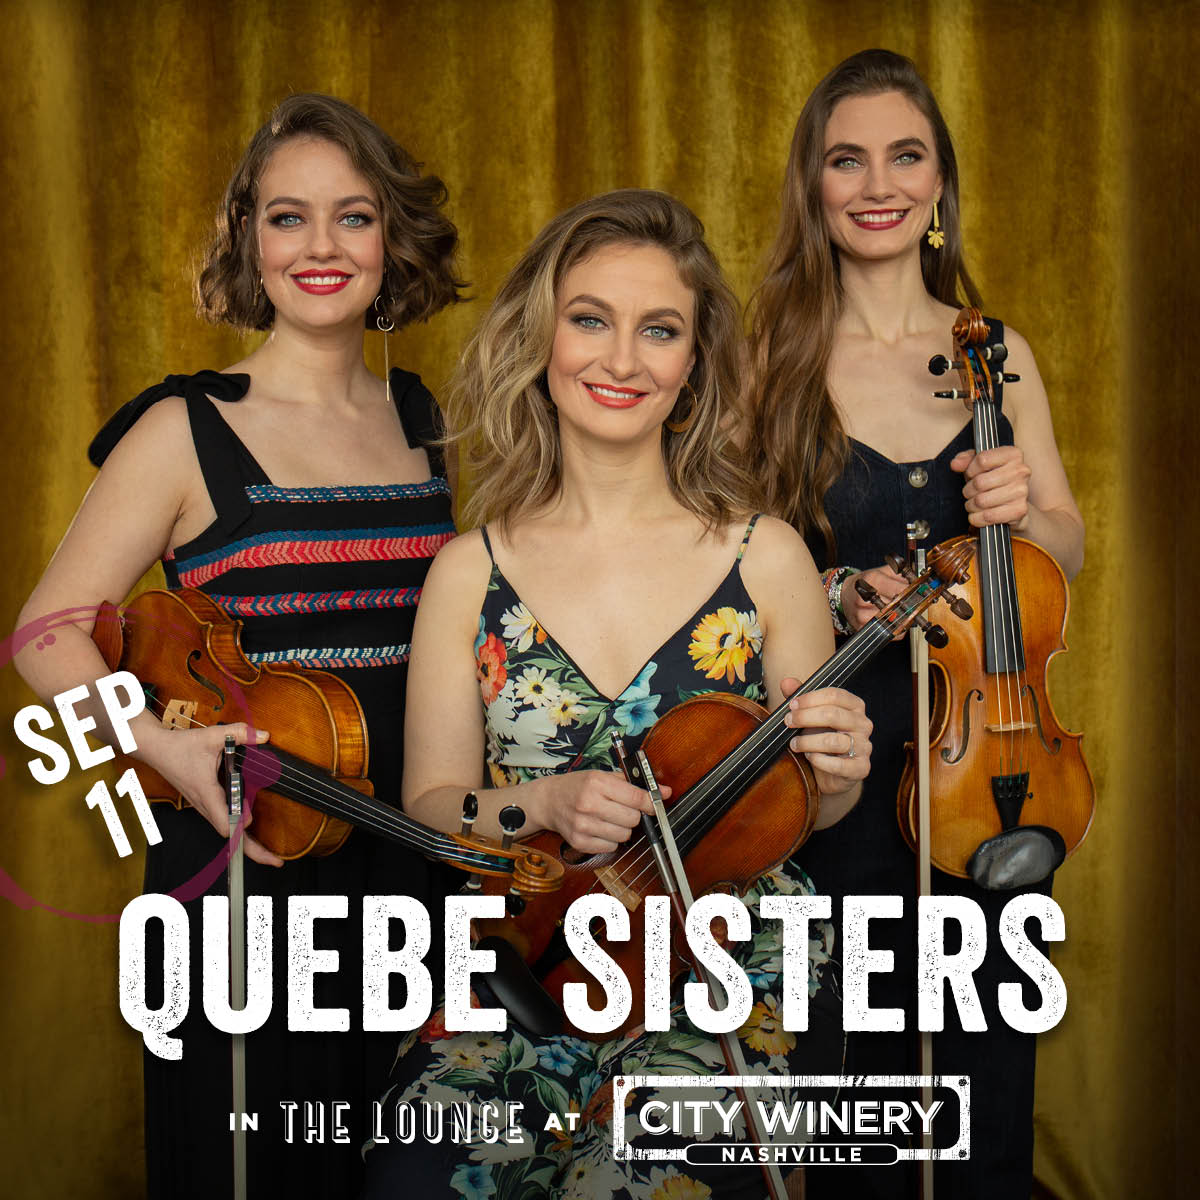 #JustAnnounced We'll be at @CityWineryNSH on September 11th!

Pre-Sale (Vinofile Members): Wednesday, May 10th at 3 PM CT
On Sale: Friday, May 12th at 12 PM CT

#QuebeSistersOnTour #citywinerynashville